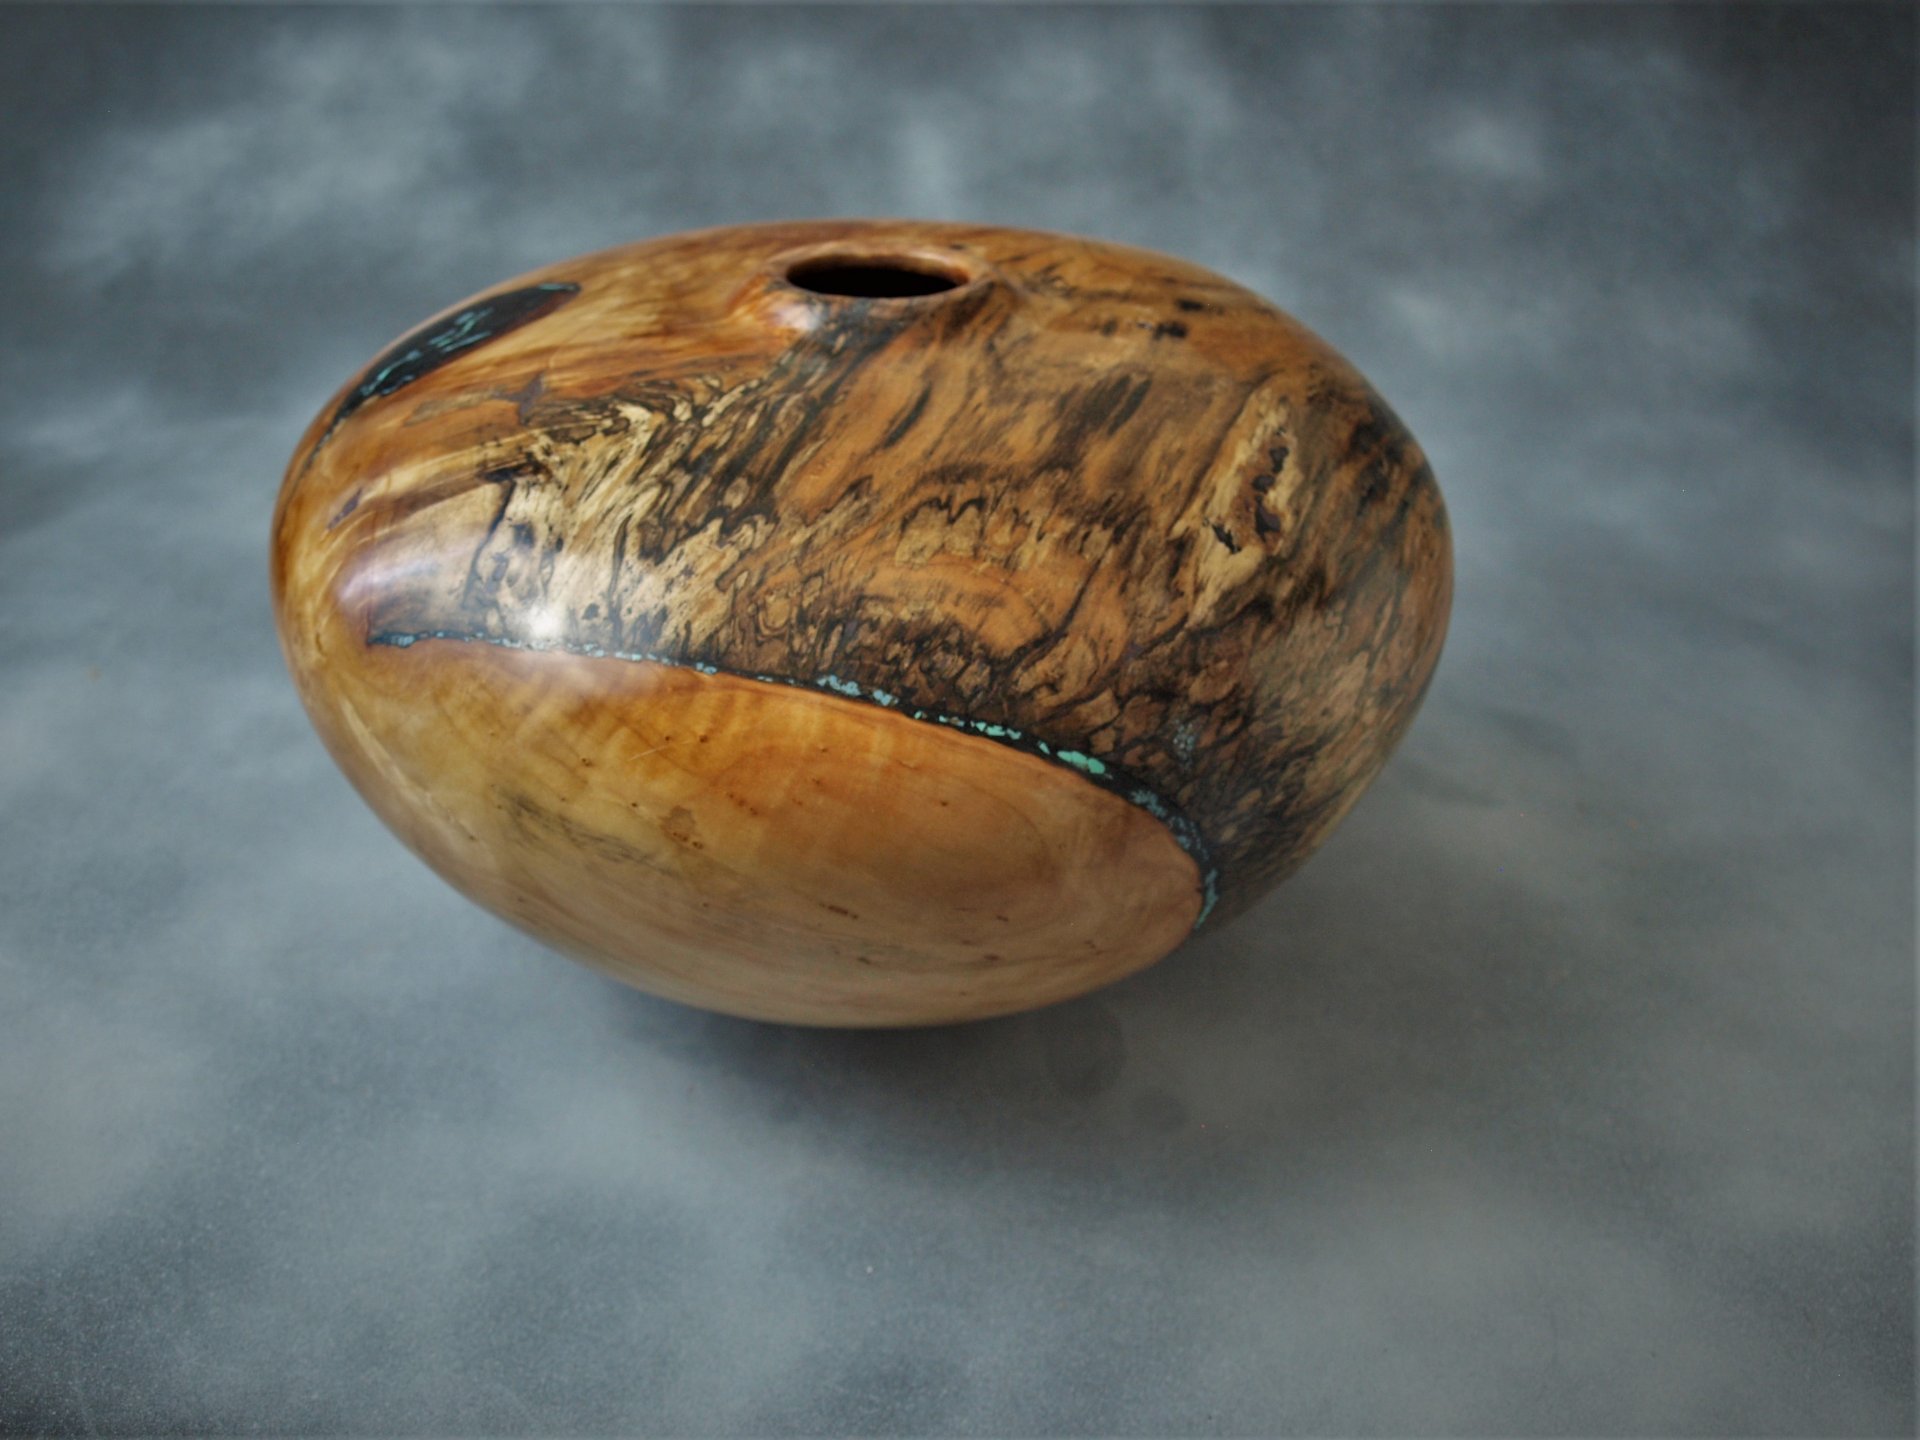 Weeping willow, spalted plus turquoise chips.